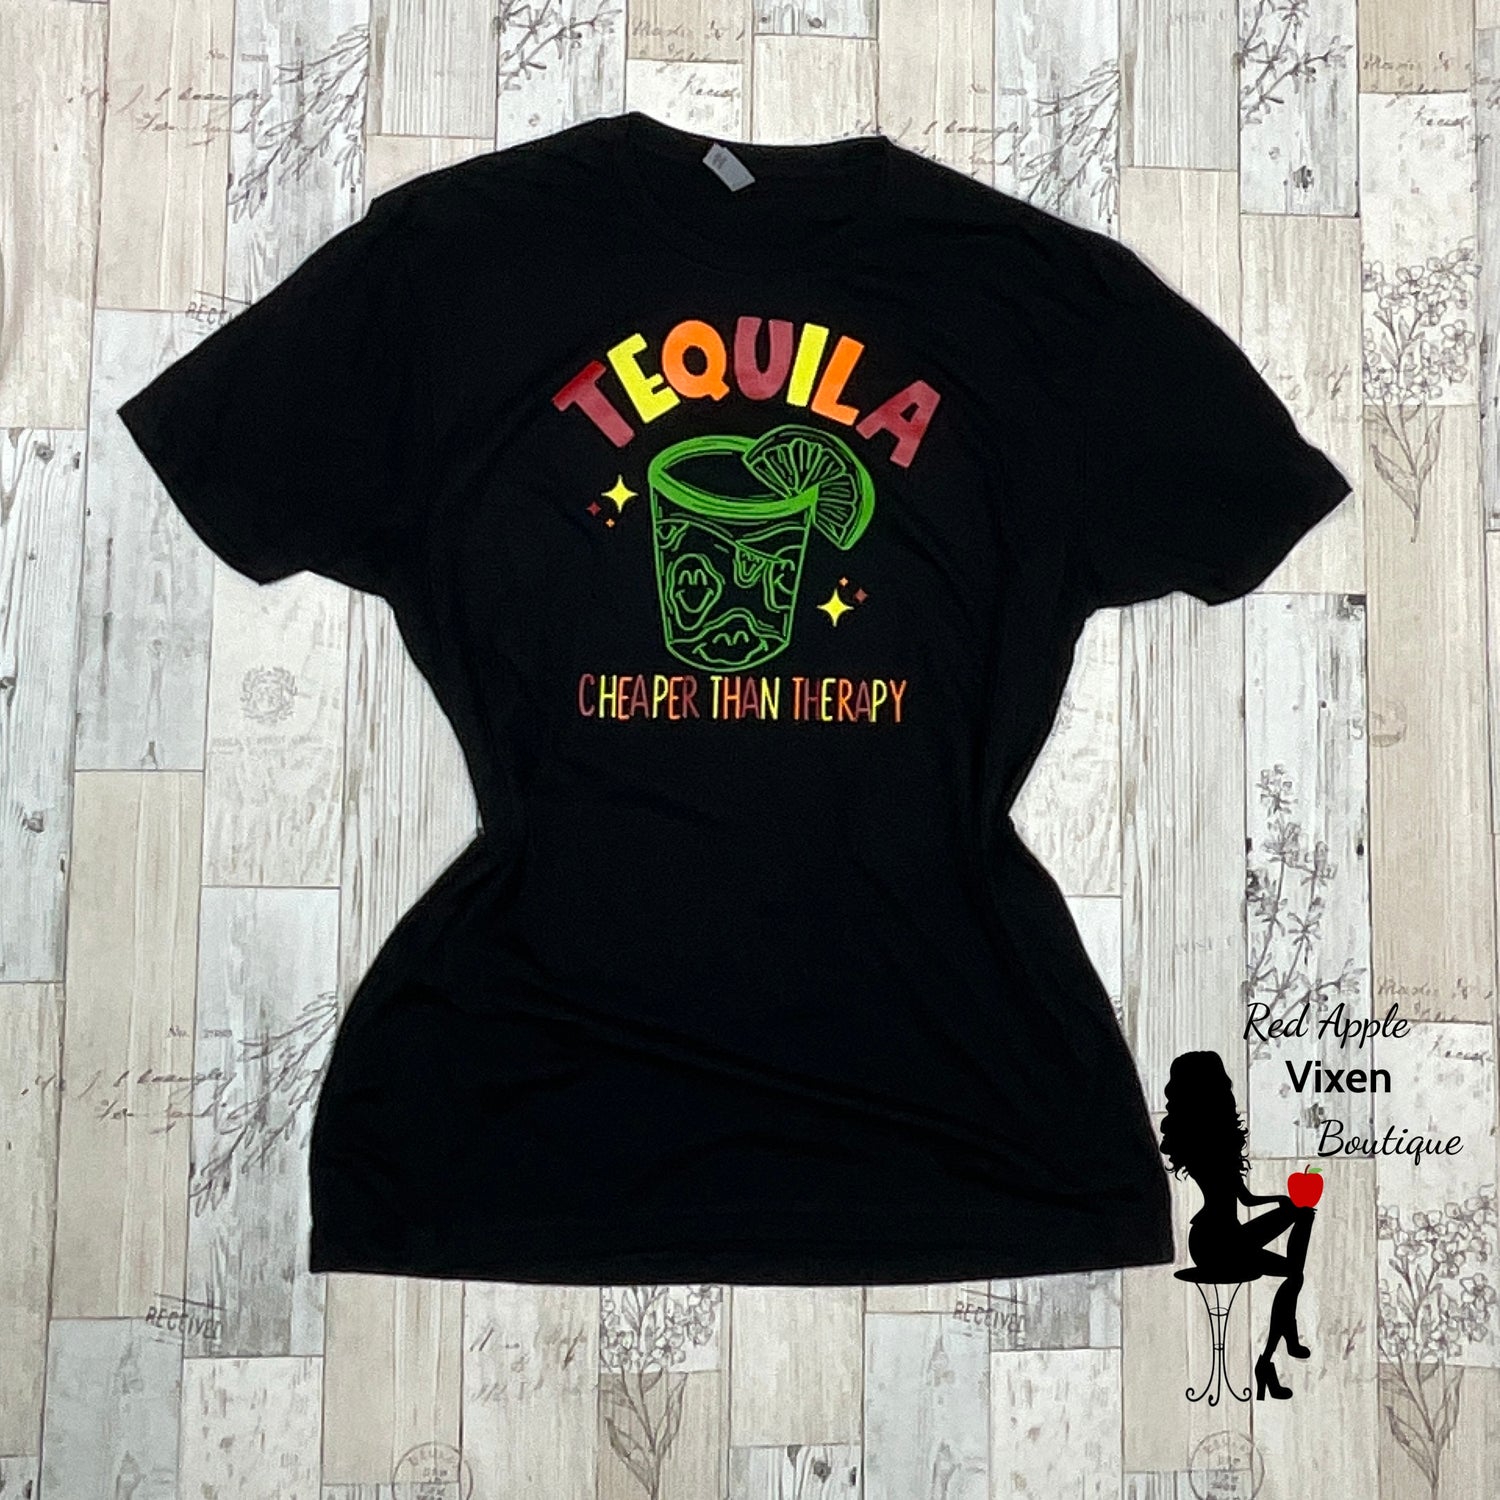 Tequila Cheaper Than Therapy Graphic Tee - Sassy Chick Clothing